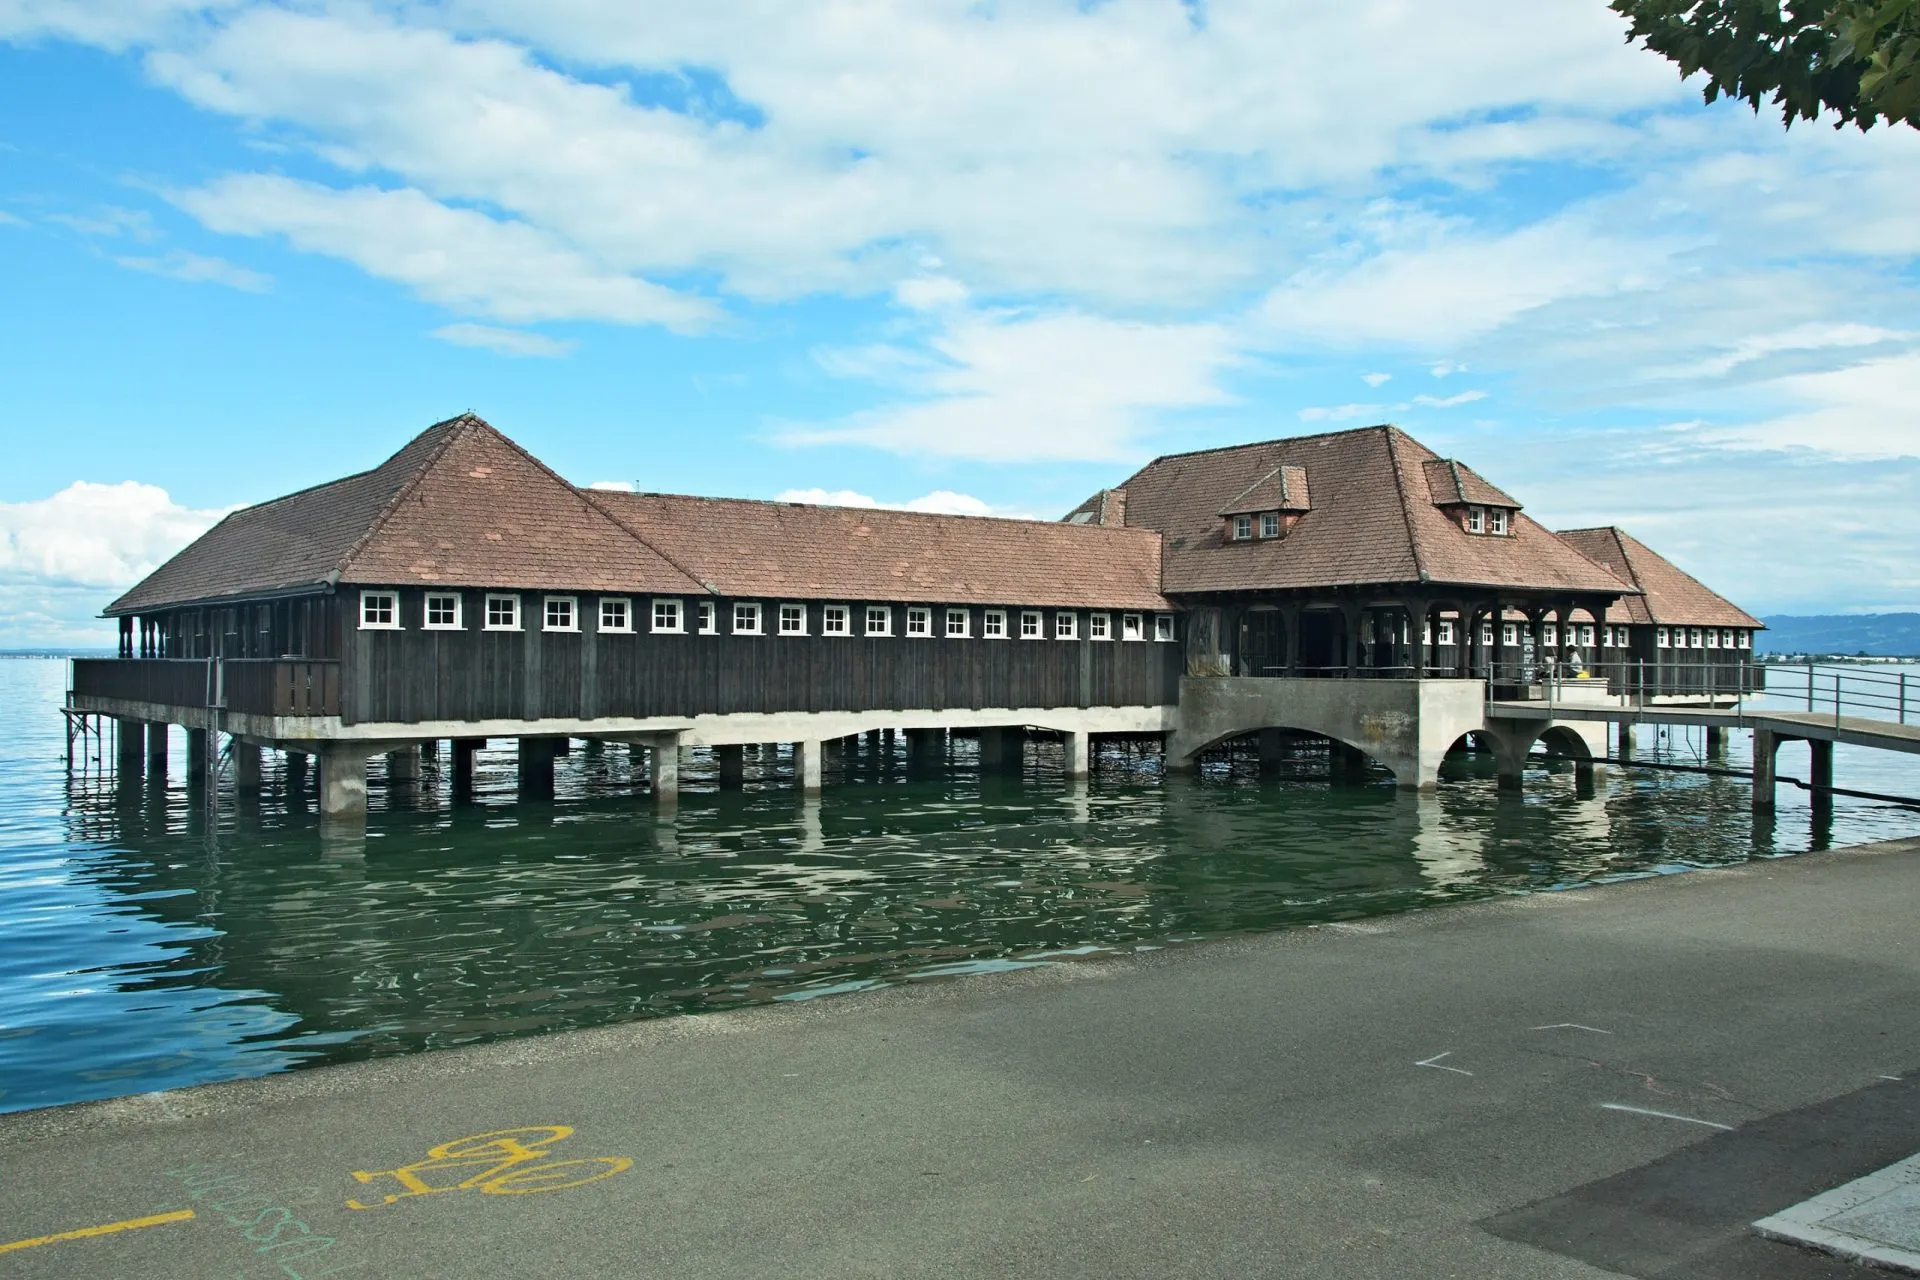 Rorschach features traditional swiss bath houses